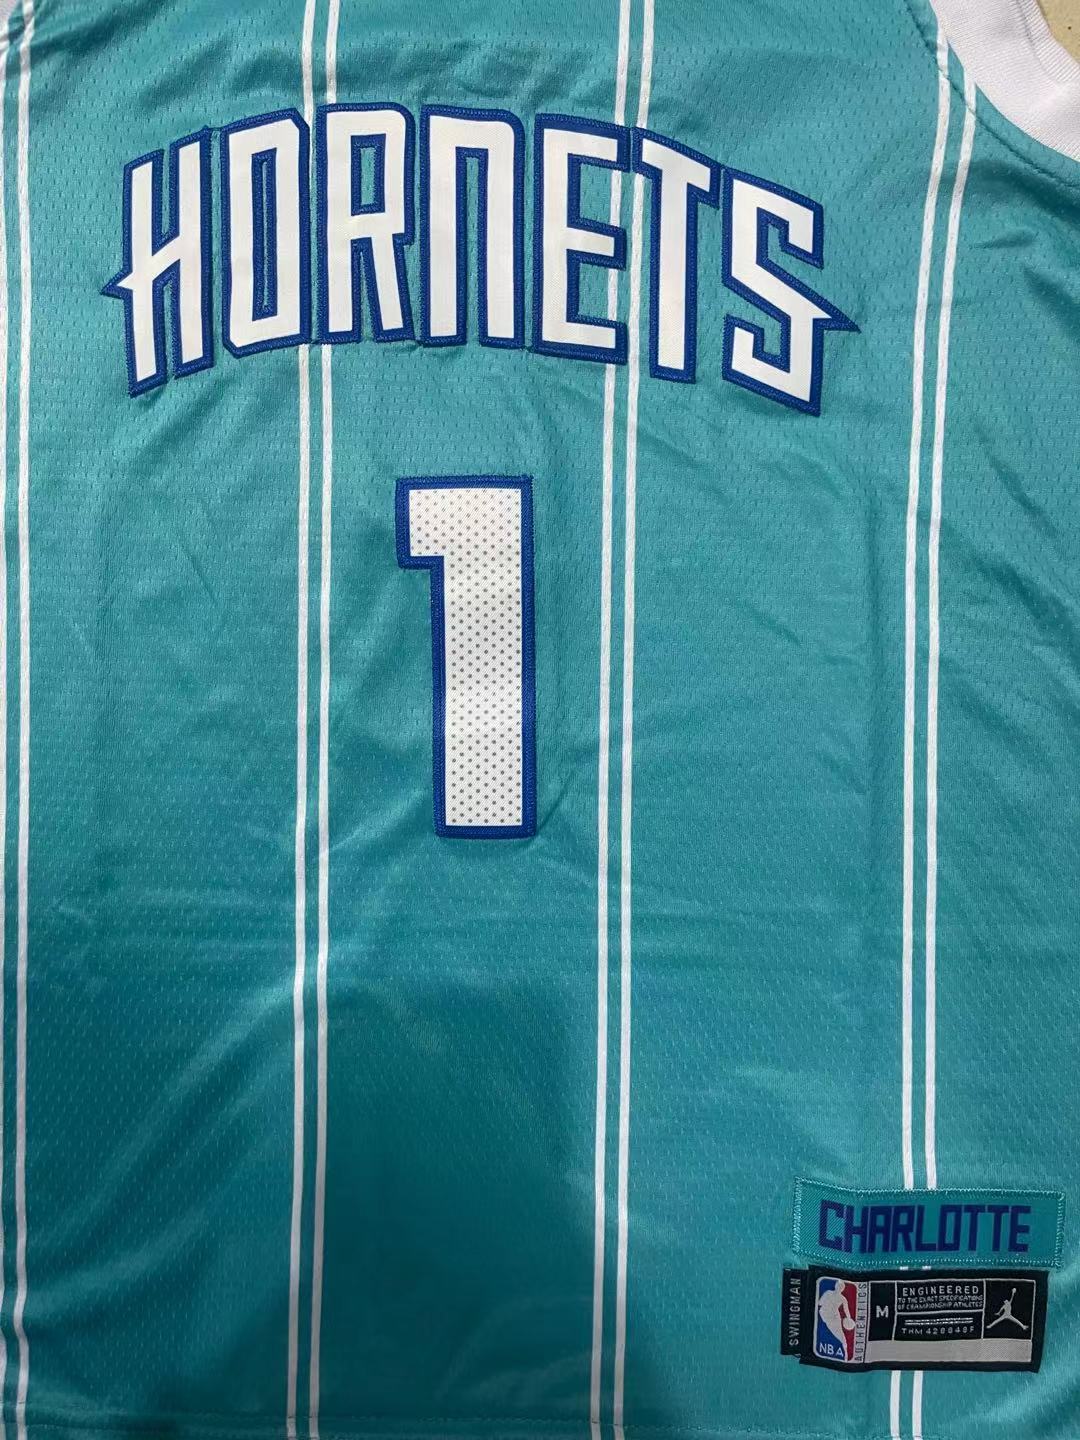 classic hornets jersey